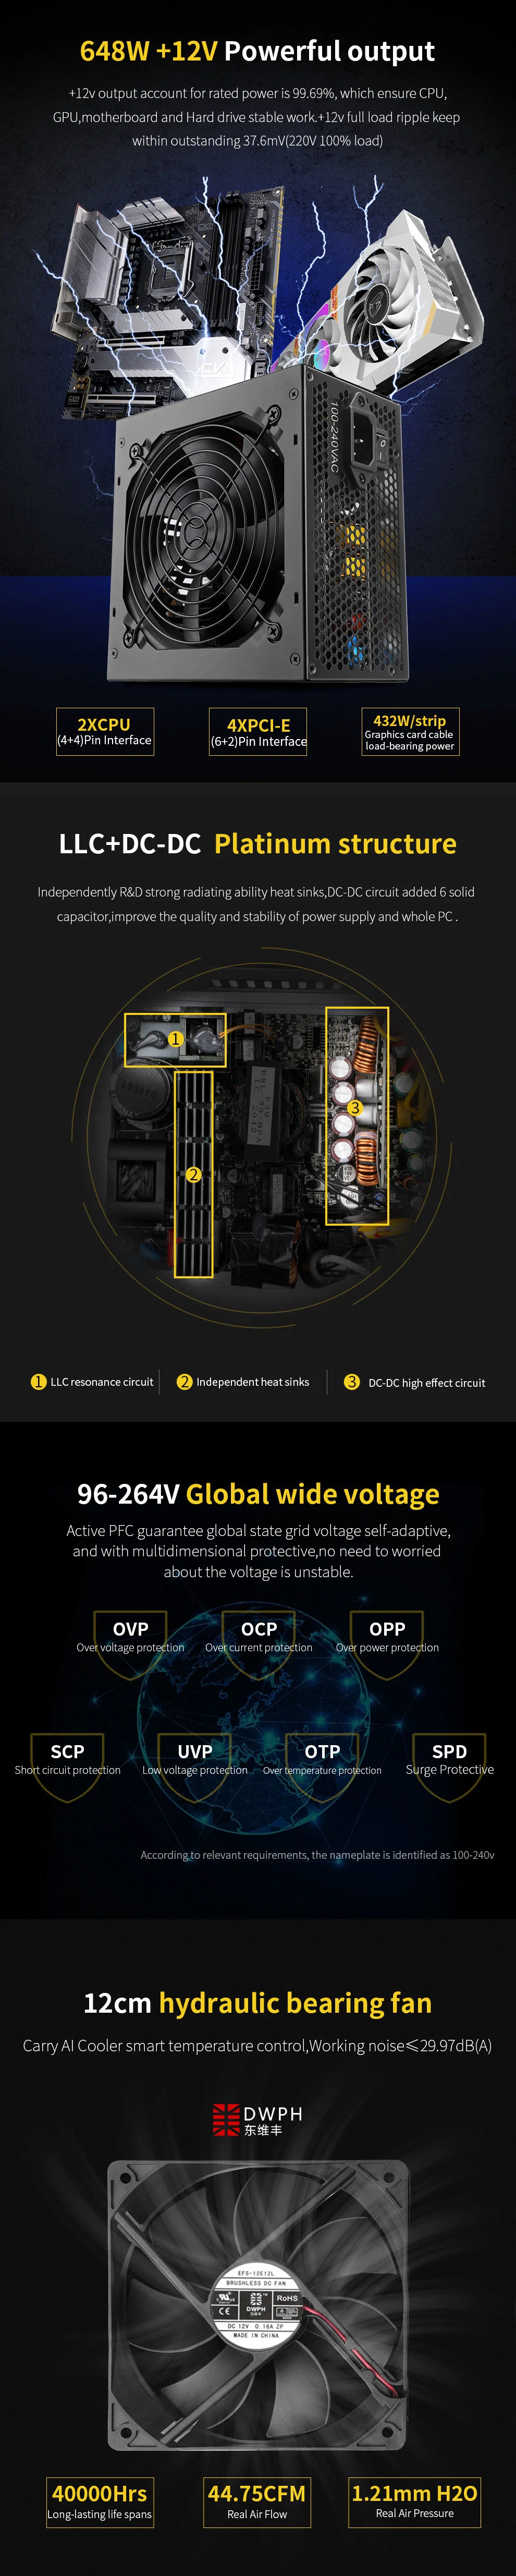 Segotep-Export-Canada-Mexico-Chile-Gaming-Switching-80-Plus-Gold-Power Supply 650W 750W 850W